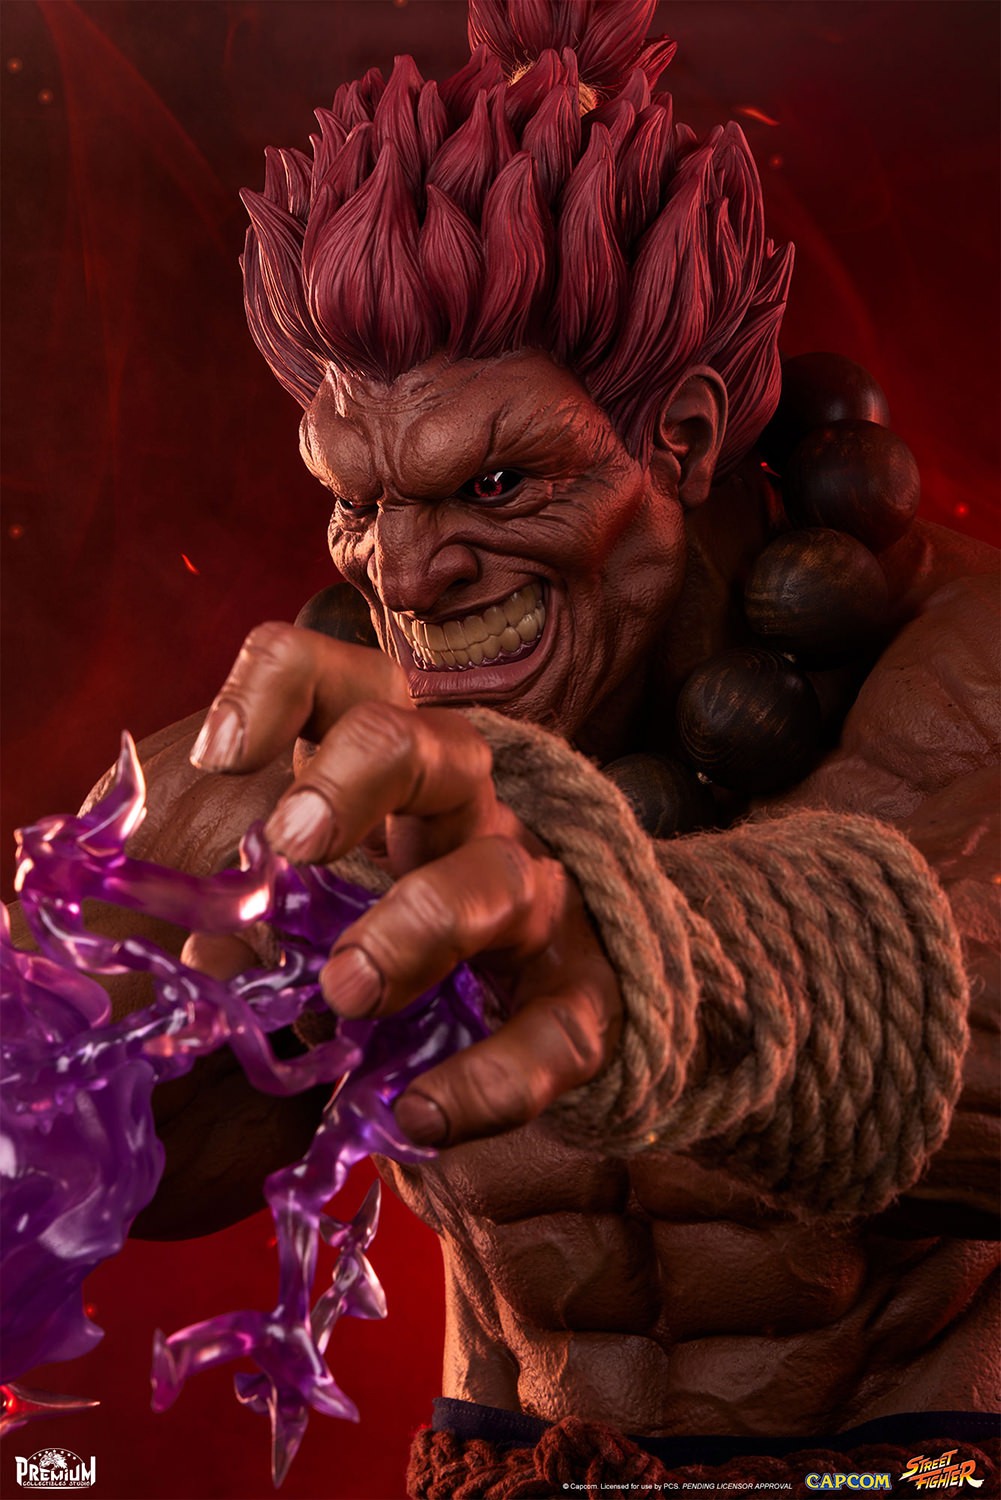 1/6 Scale Licensed Movable Akuma - Street Fighter Resin Statue - CAPCOM  [Pre-Order]